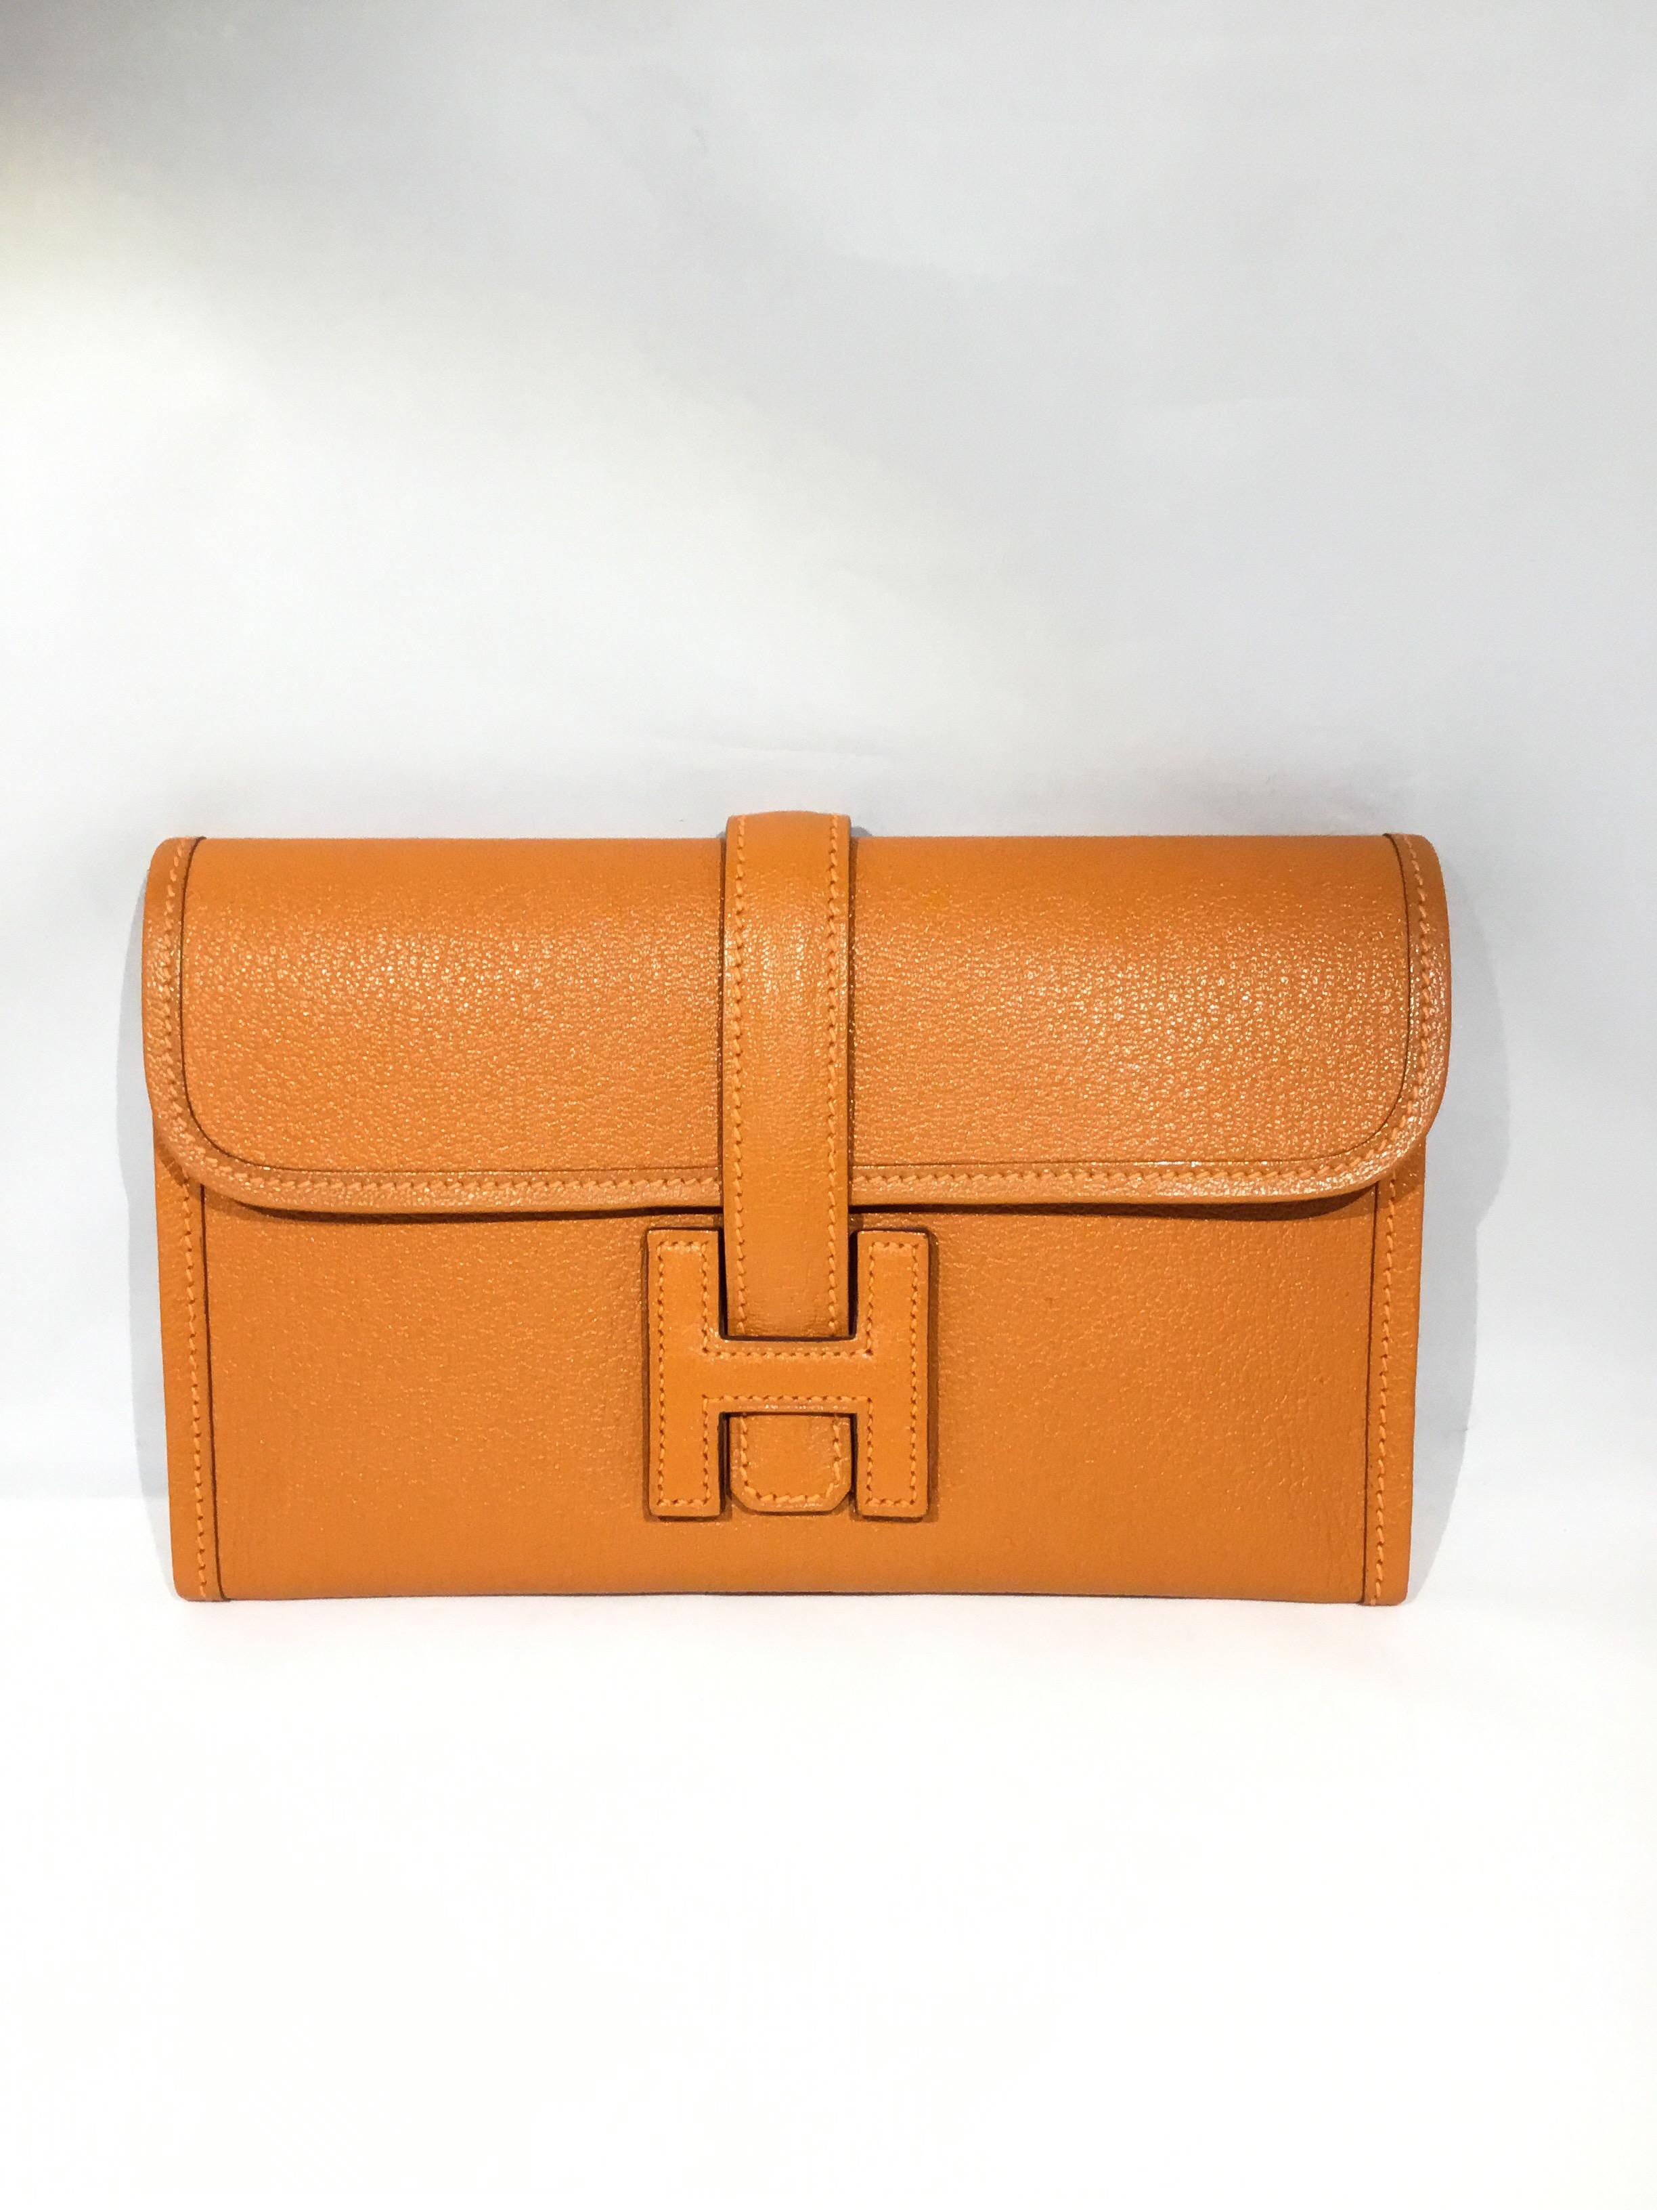 Hermes 20cm Jige clutch is crafted of textured goatskin leather in a burnt orange. The cross-over flap and strap secures under a leather Hermes H. Made in France. 

Box + Dustbag included

Blind Stamp: P K in a square, 25

Measurements: 8” x 1” x 5”